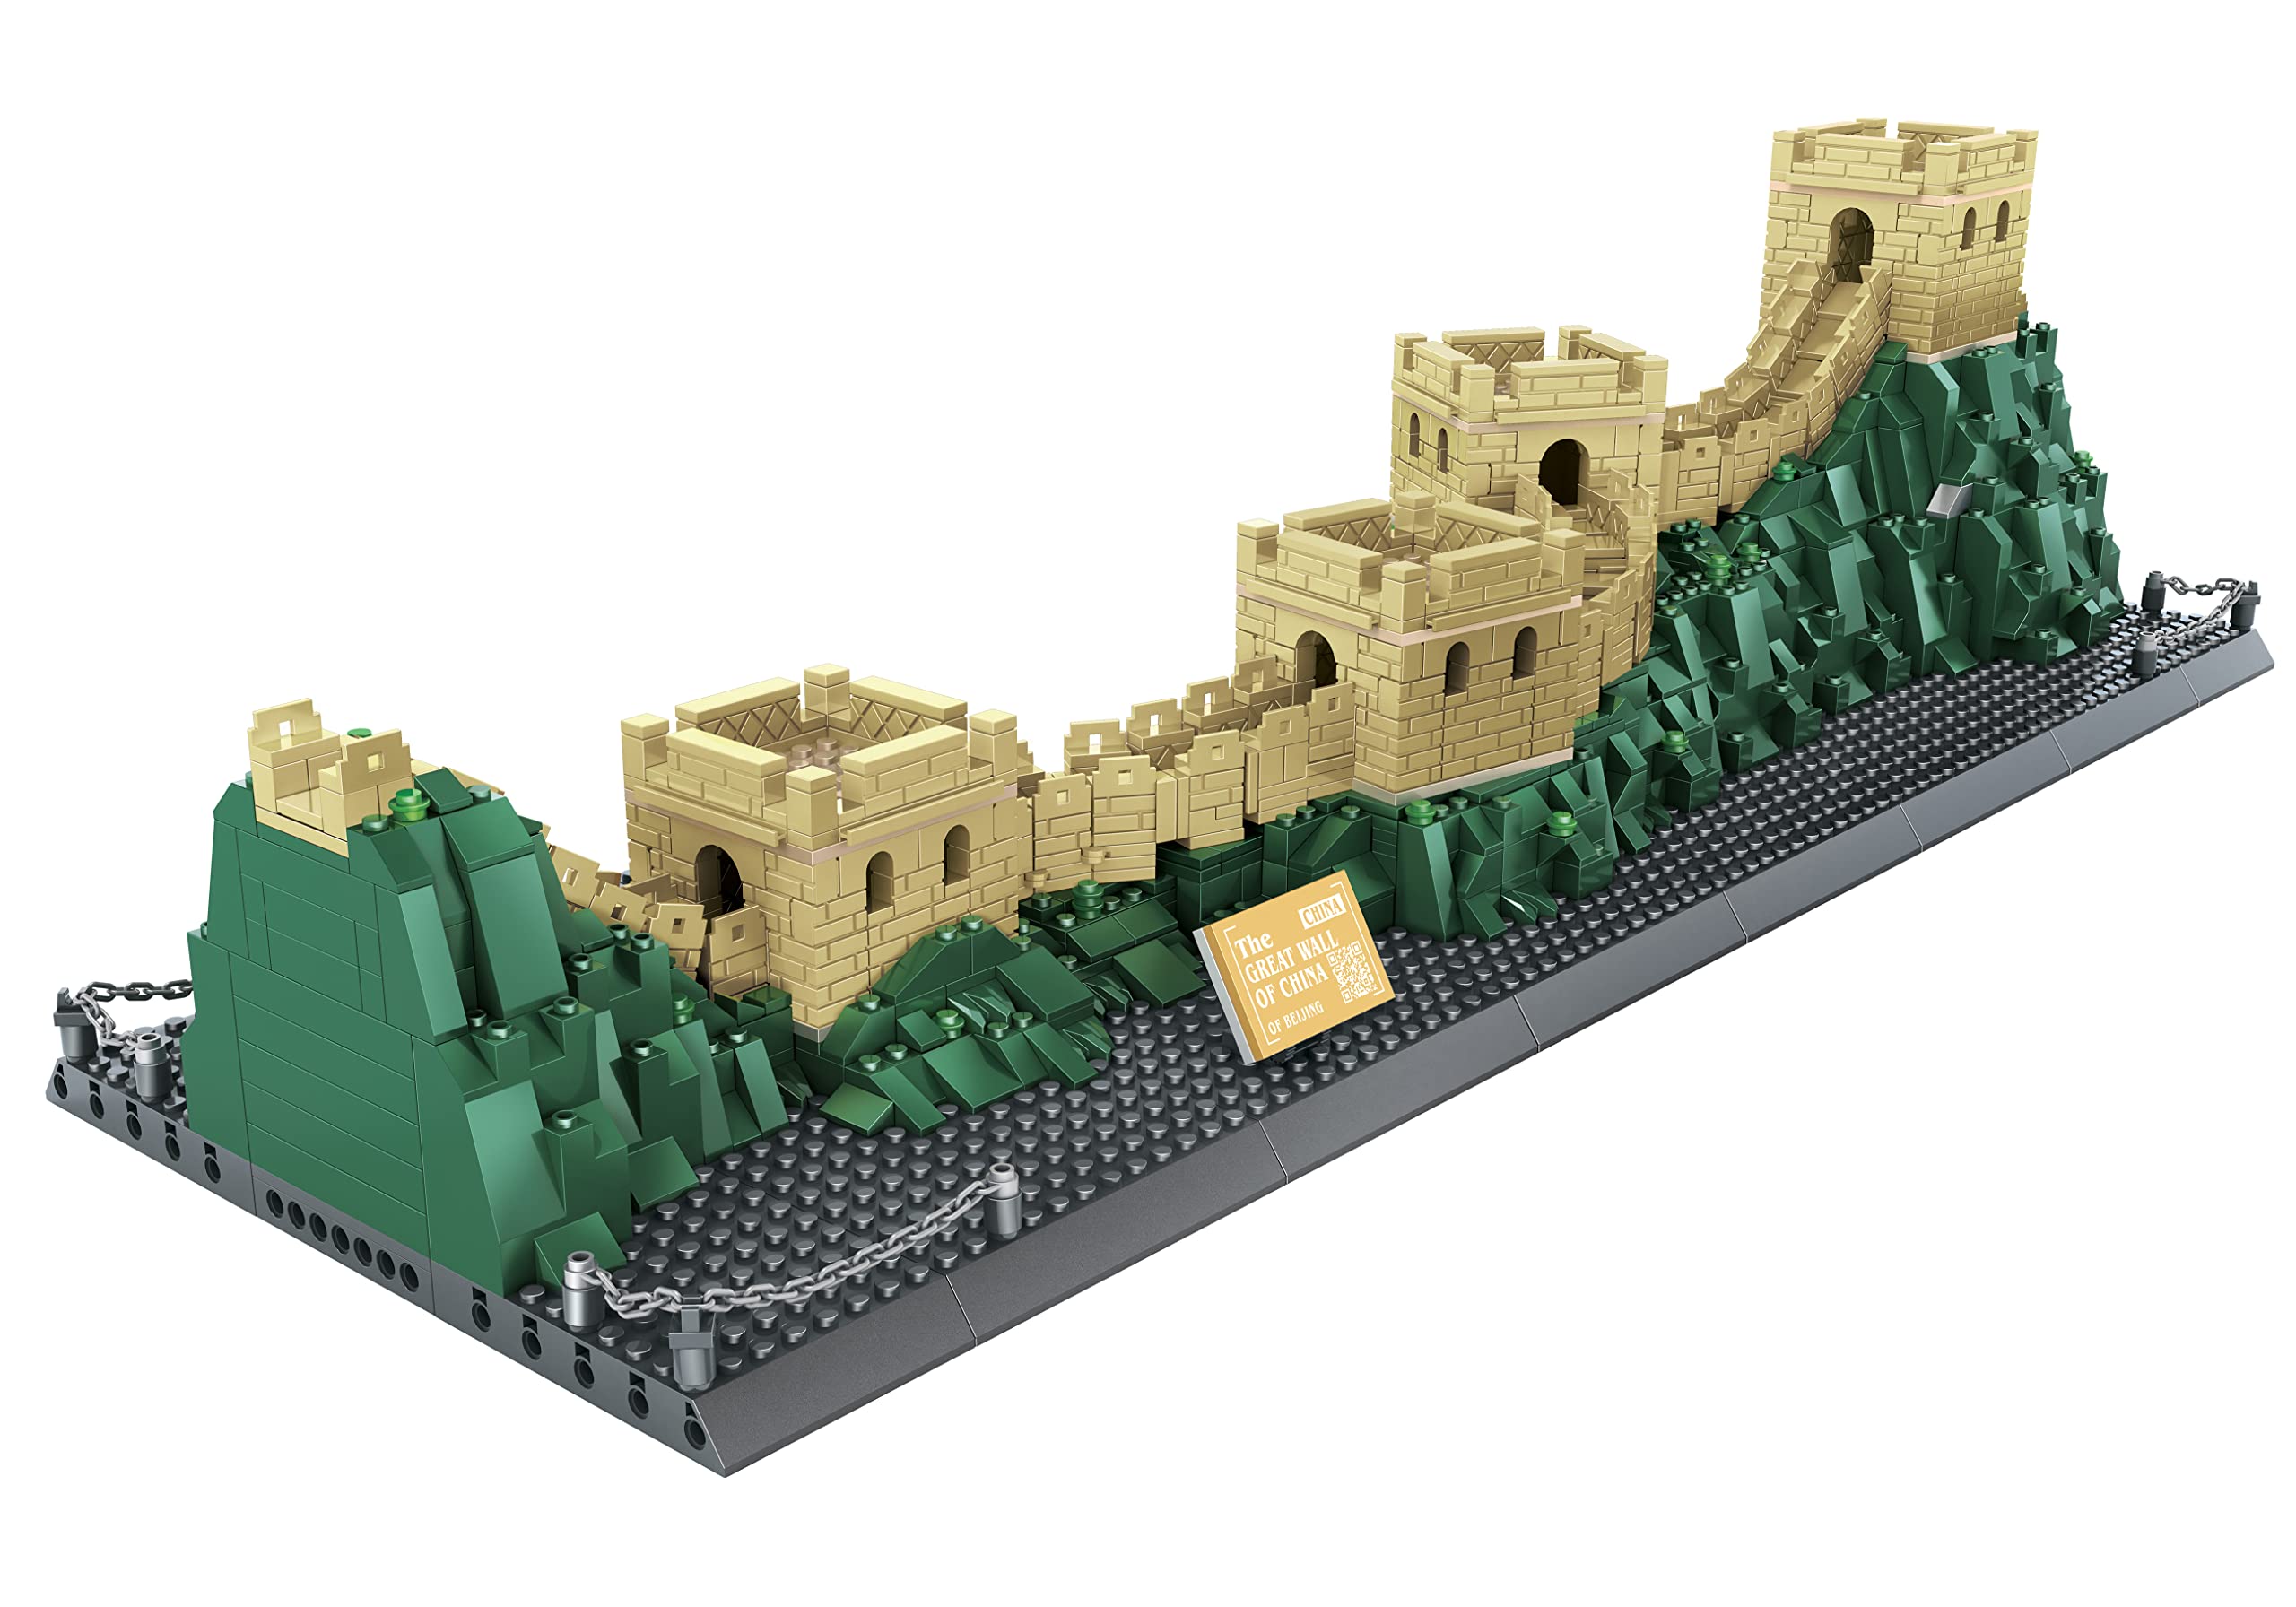 Apostrophe Games Great Wall Of China Building Block Set (1407 Pieces) Chinas Great Wall Famous Landmark Series - Architecture Mo